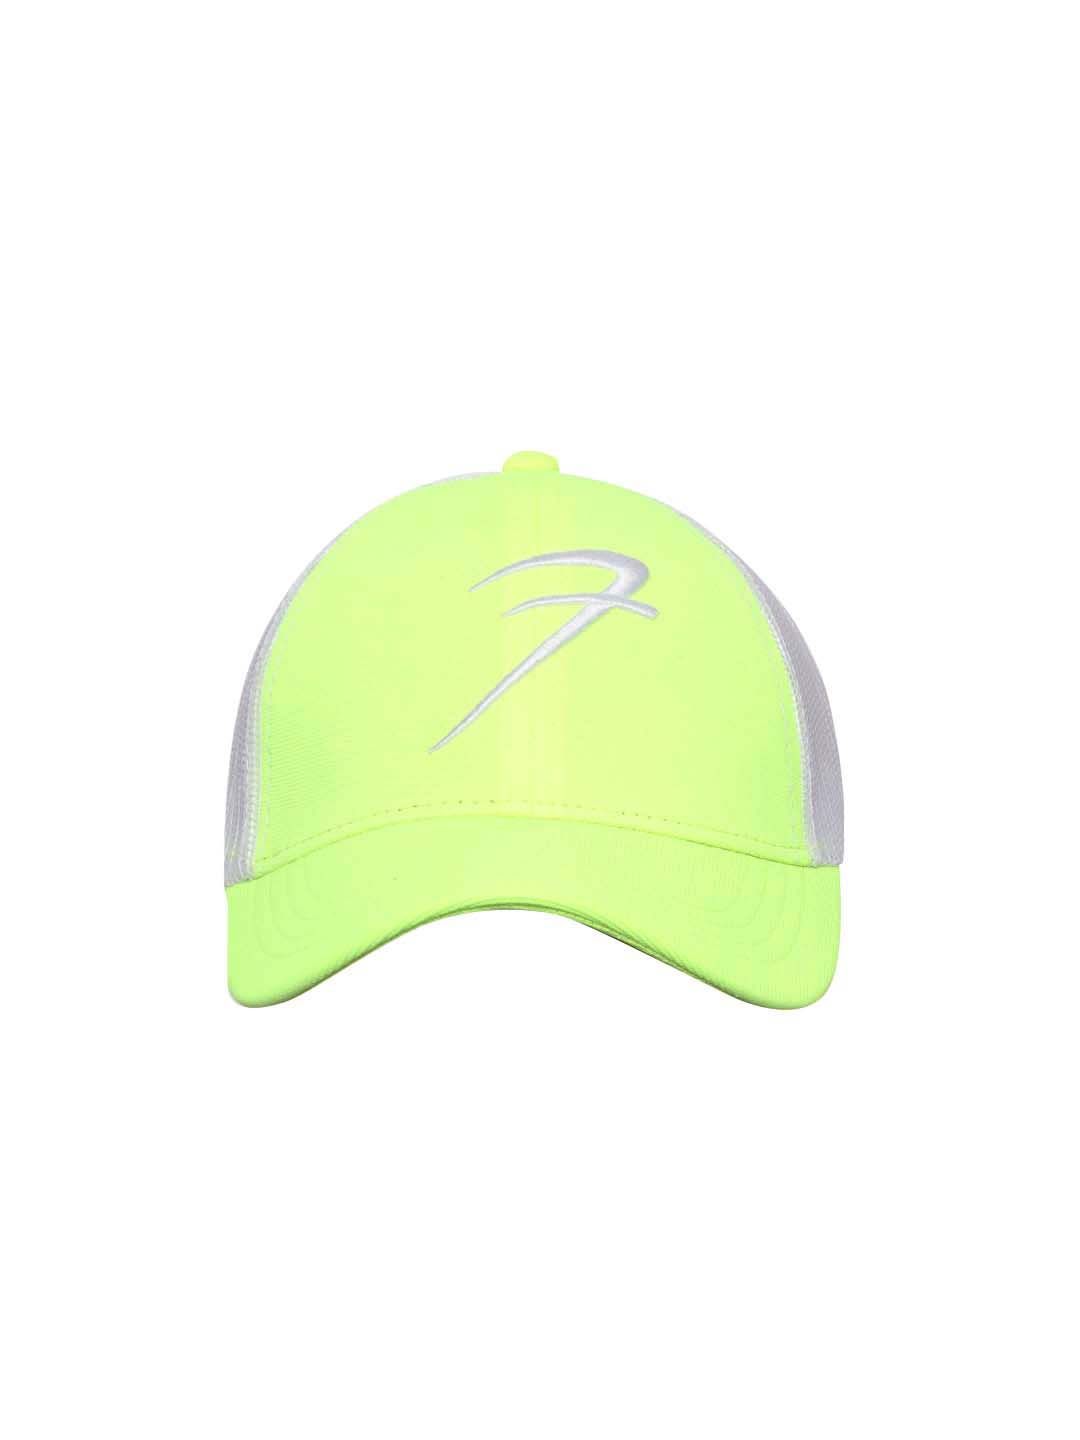 FUAARK Unisex Lime Green & White Embroidered Baseball Cap Price in India